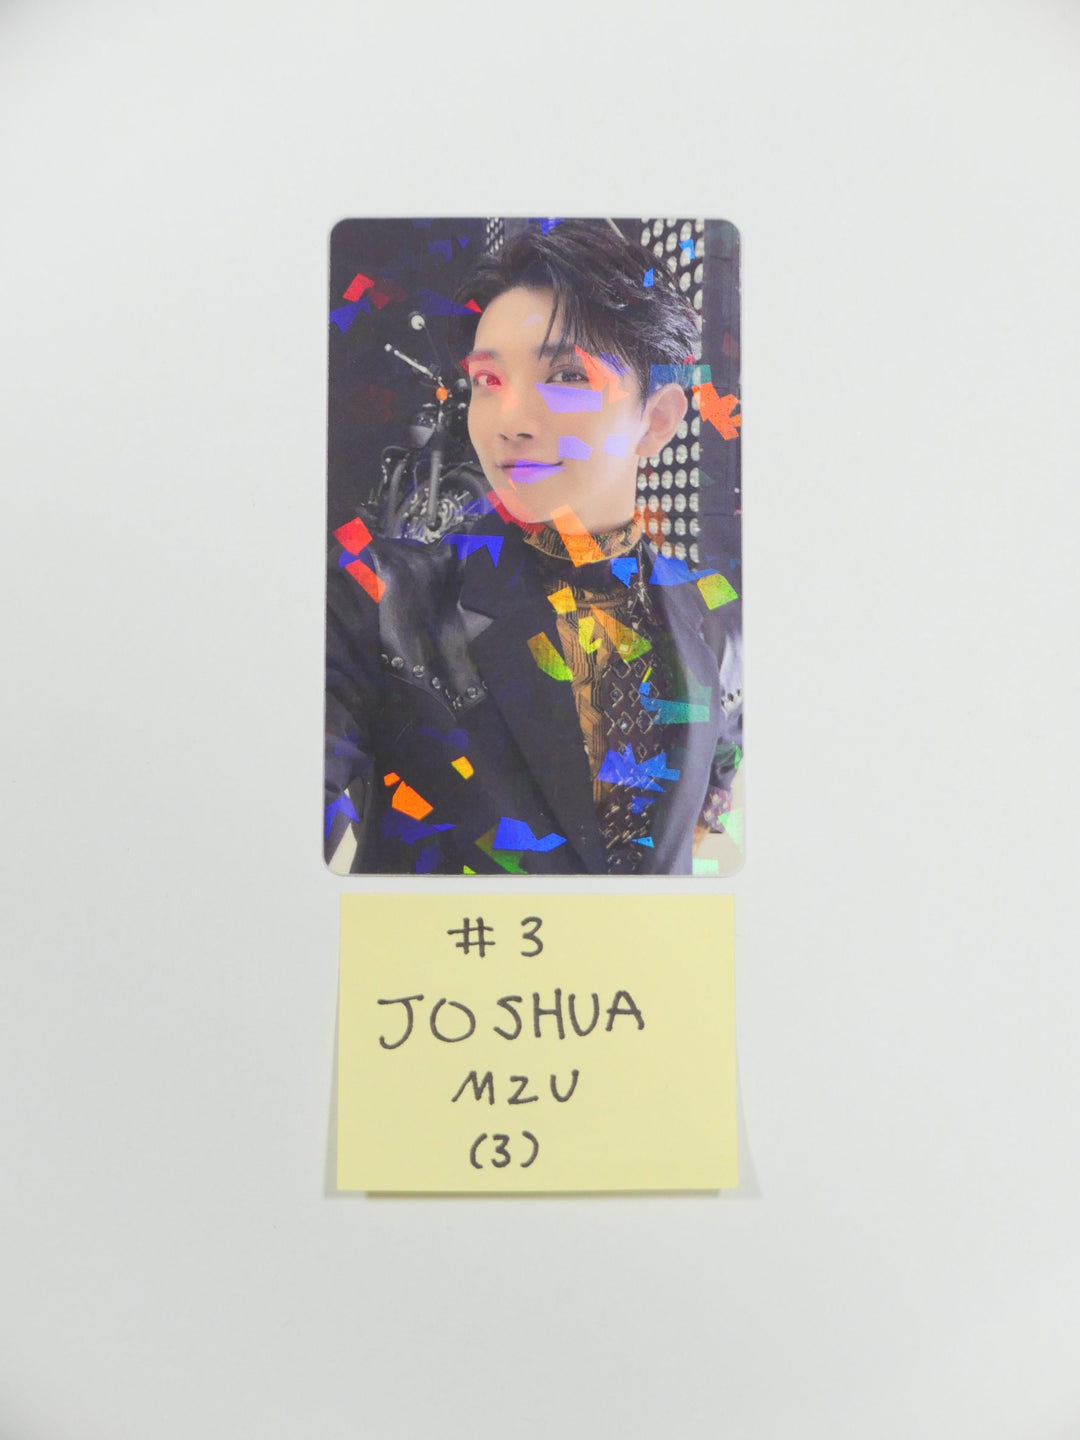 Seventeen 'Attacca' - M2U Lucky Draw Hologram Photocard Round 2 [Updated 11/15]